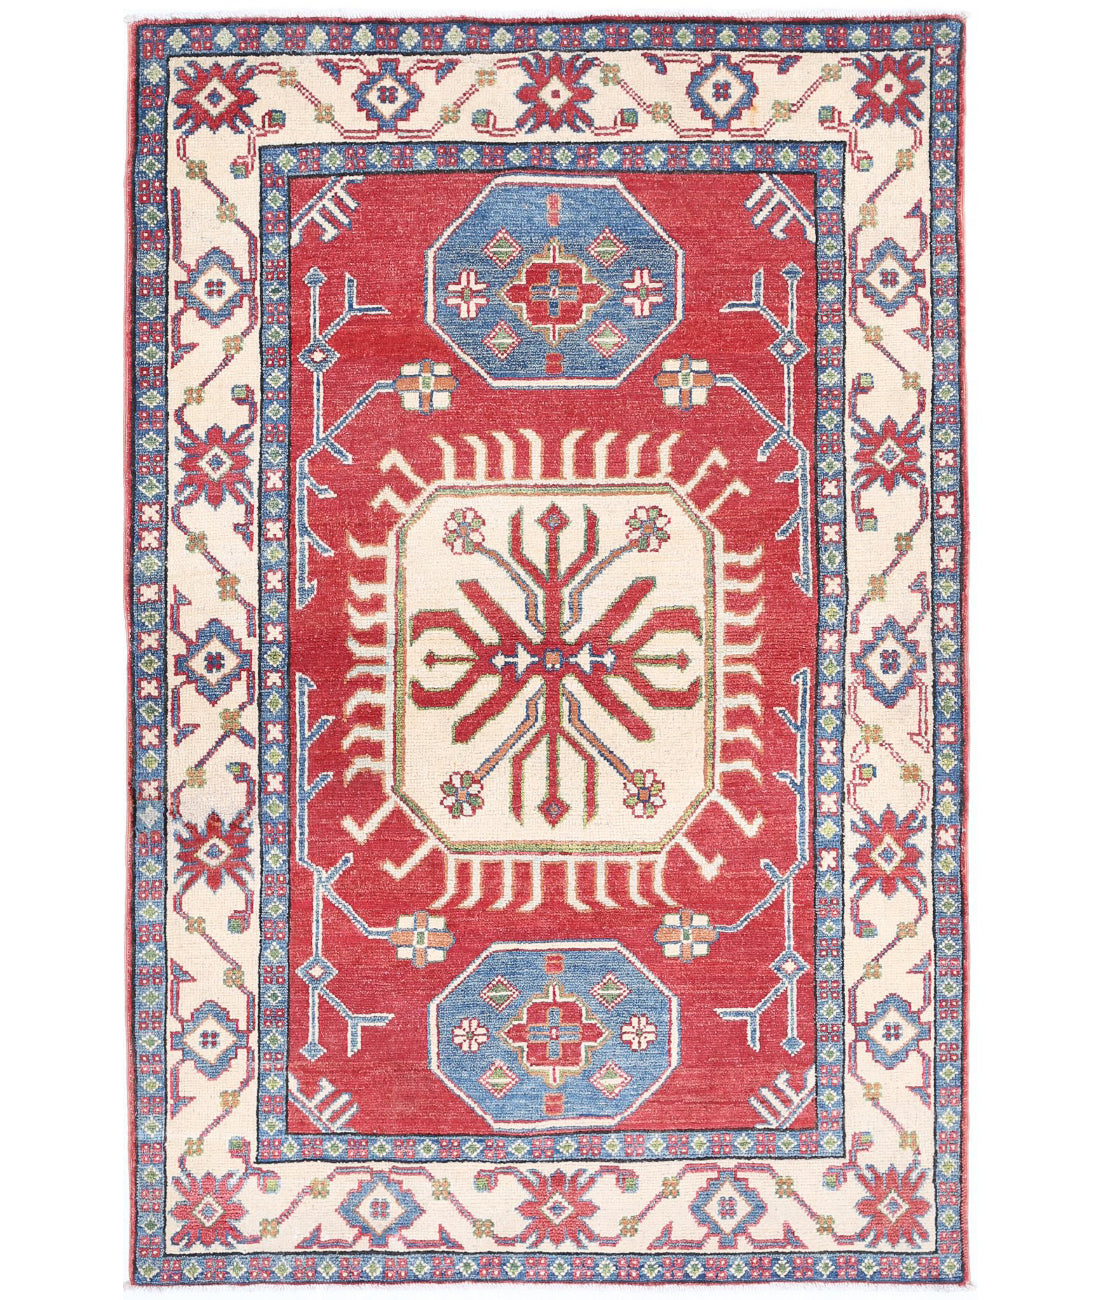 Hand Knotted Tribal Kazak Wool Rug - 3'4'' x 5'3'' 3'4'' x 5'3'' (100 X 158) / Red / Ivory